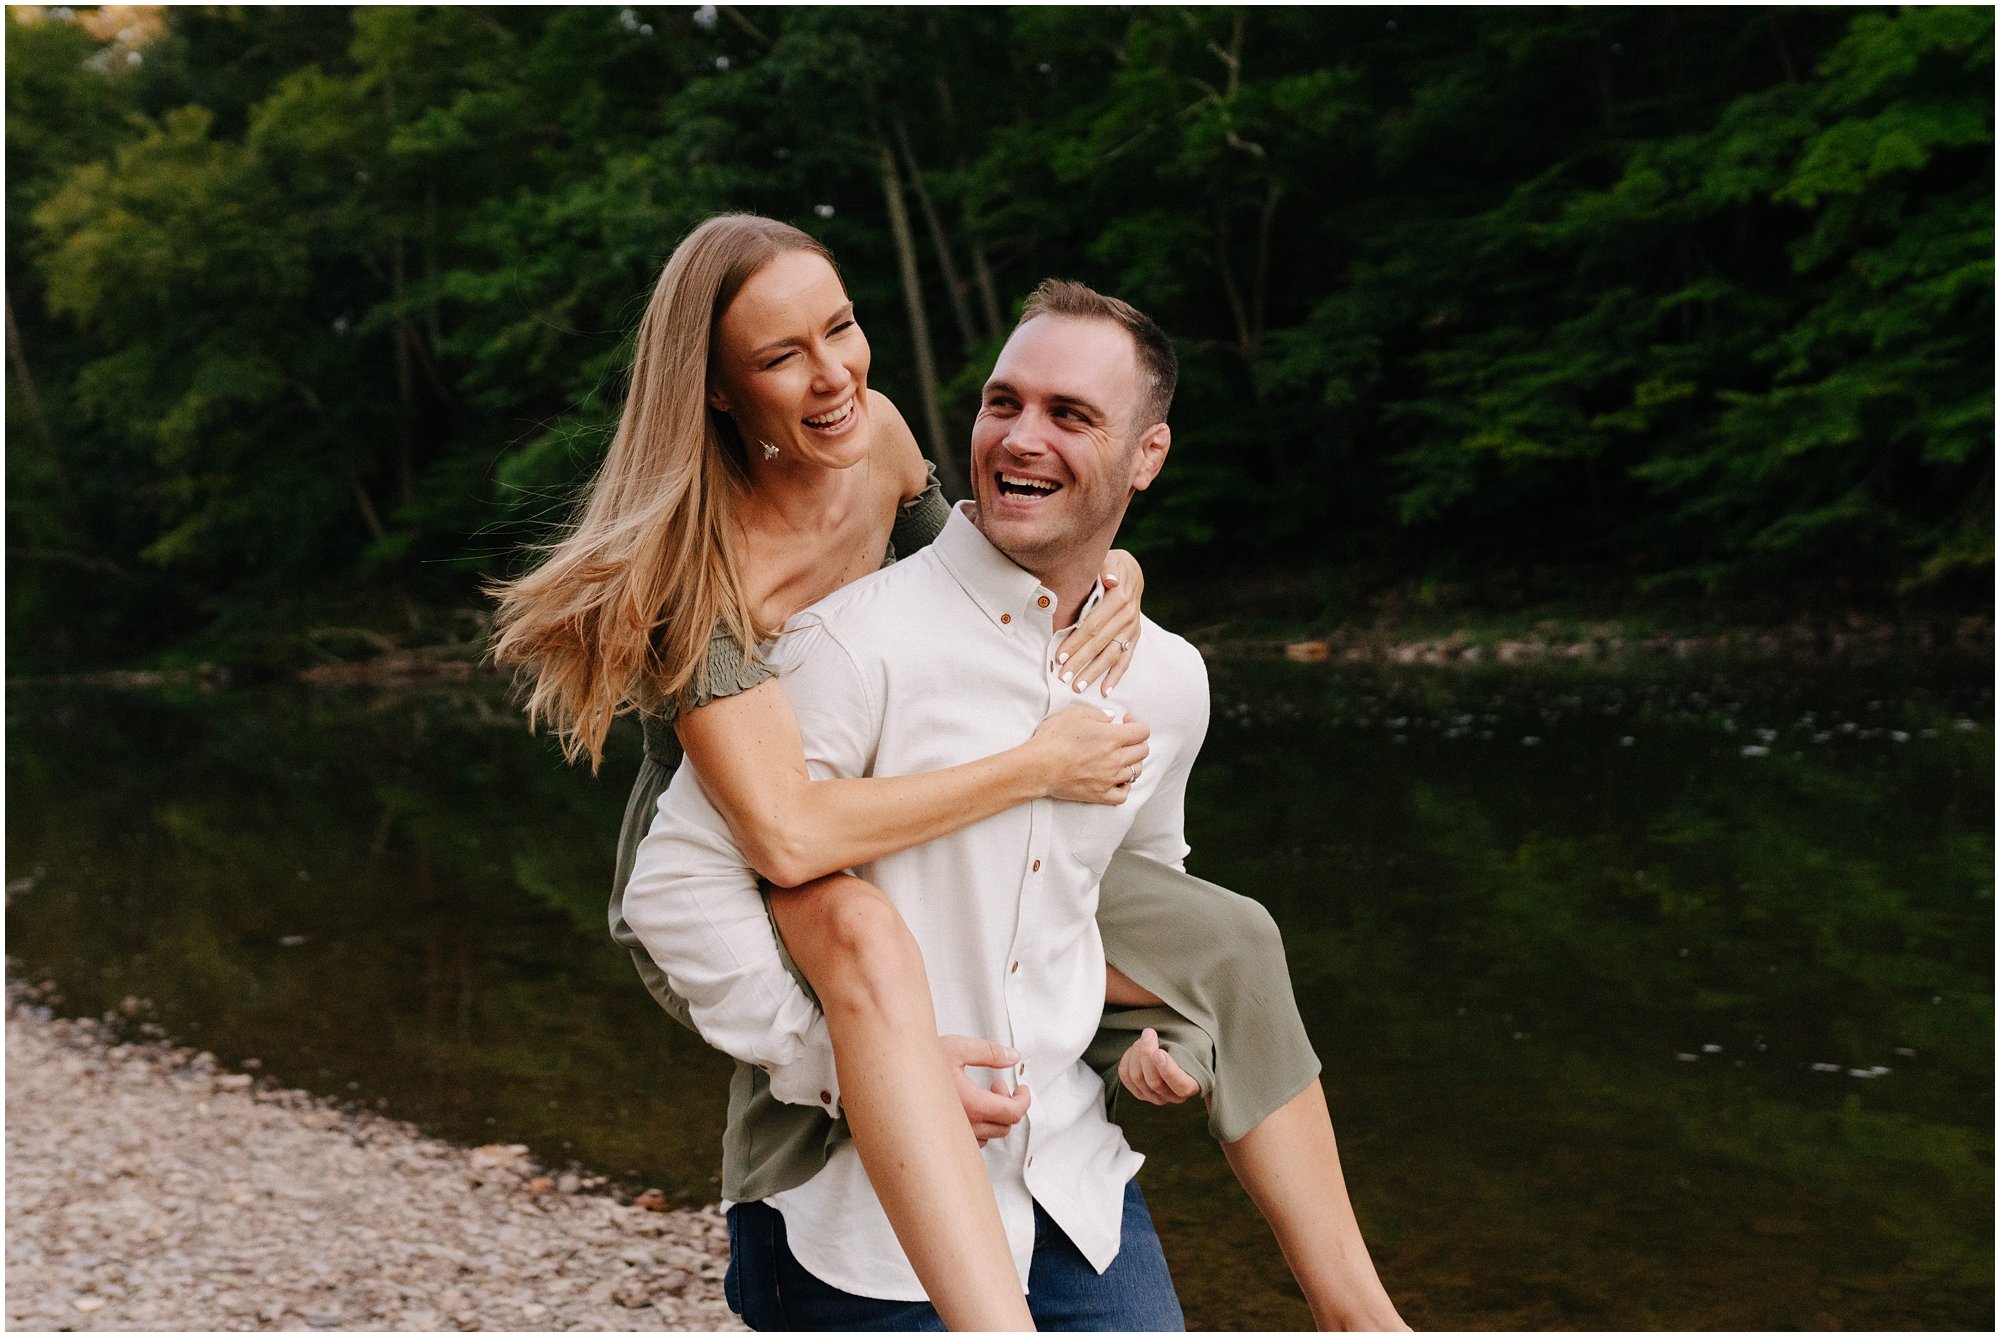 Bucks County engagement photos at Tyler State Park